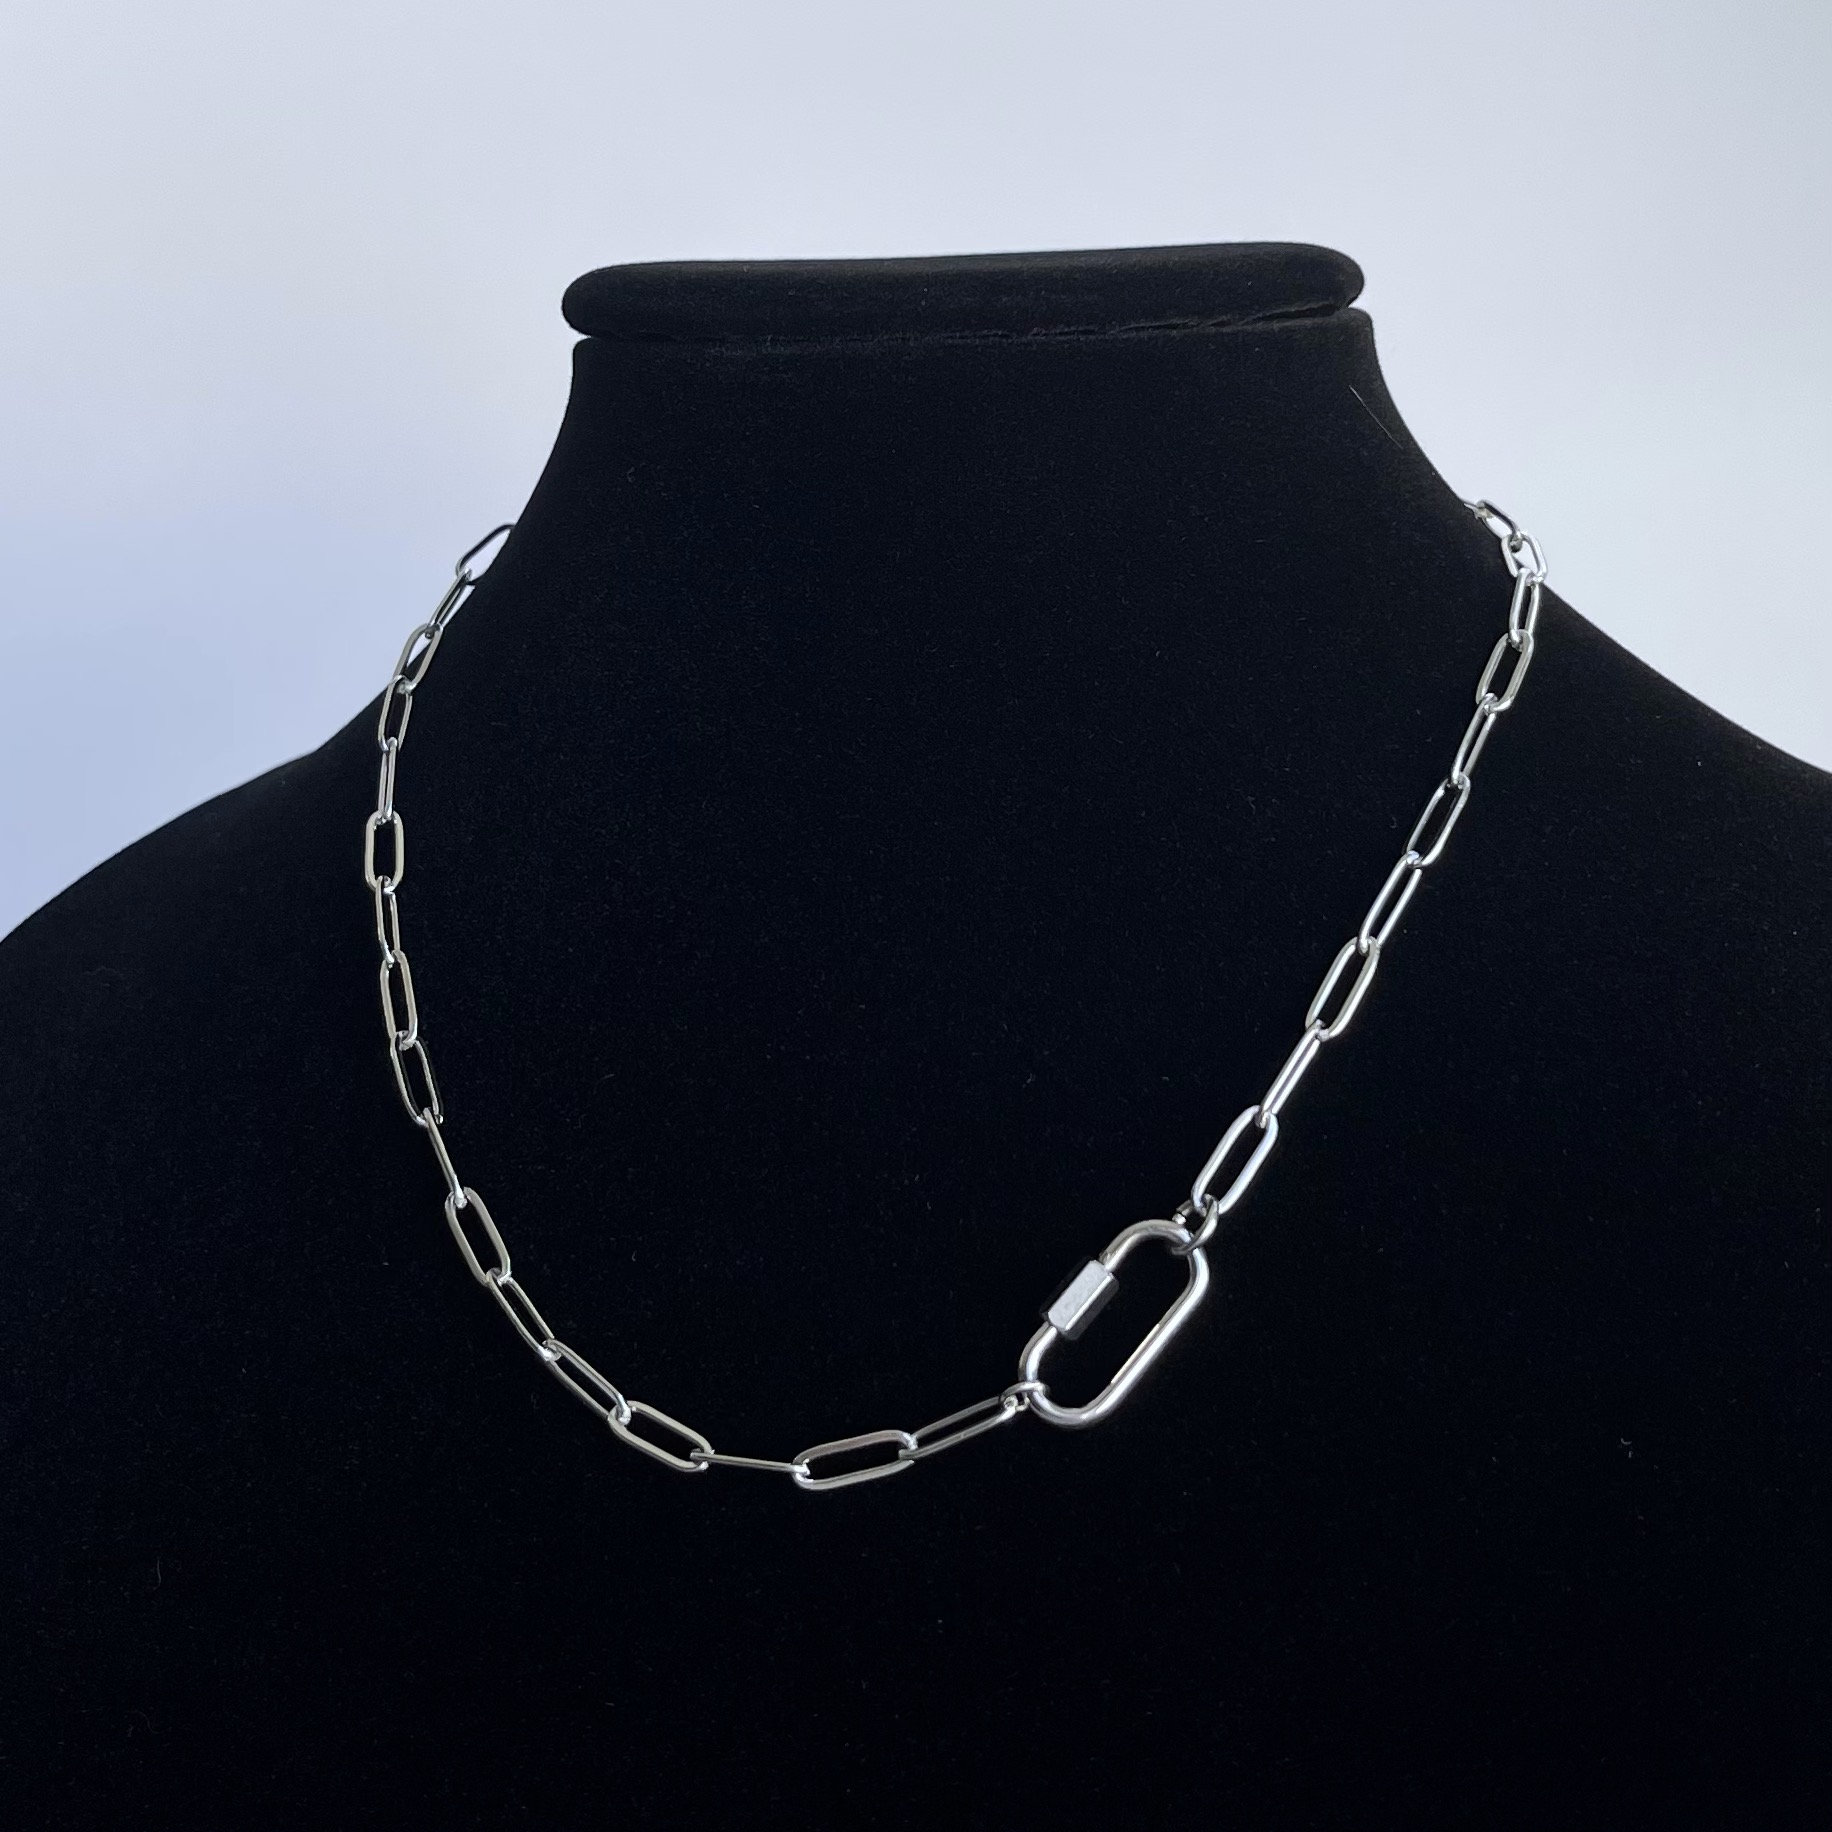 Dainty Silver And 16 Carabiner Necklace For Women 